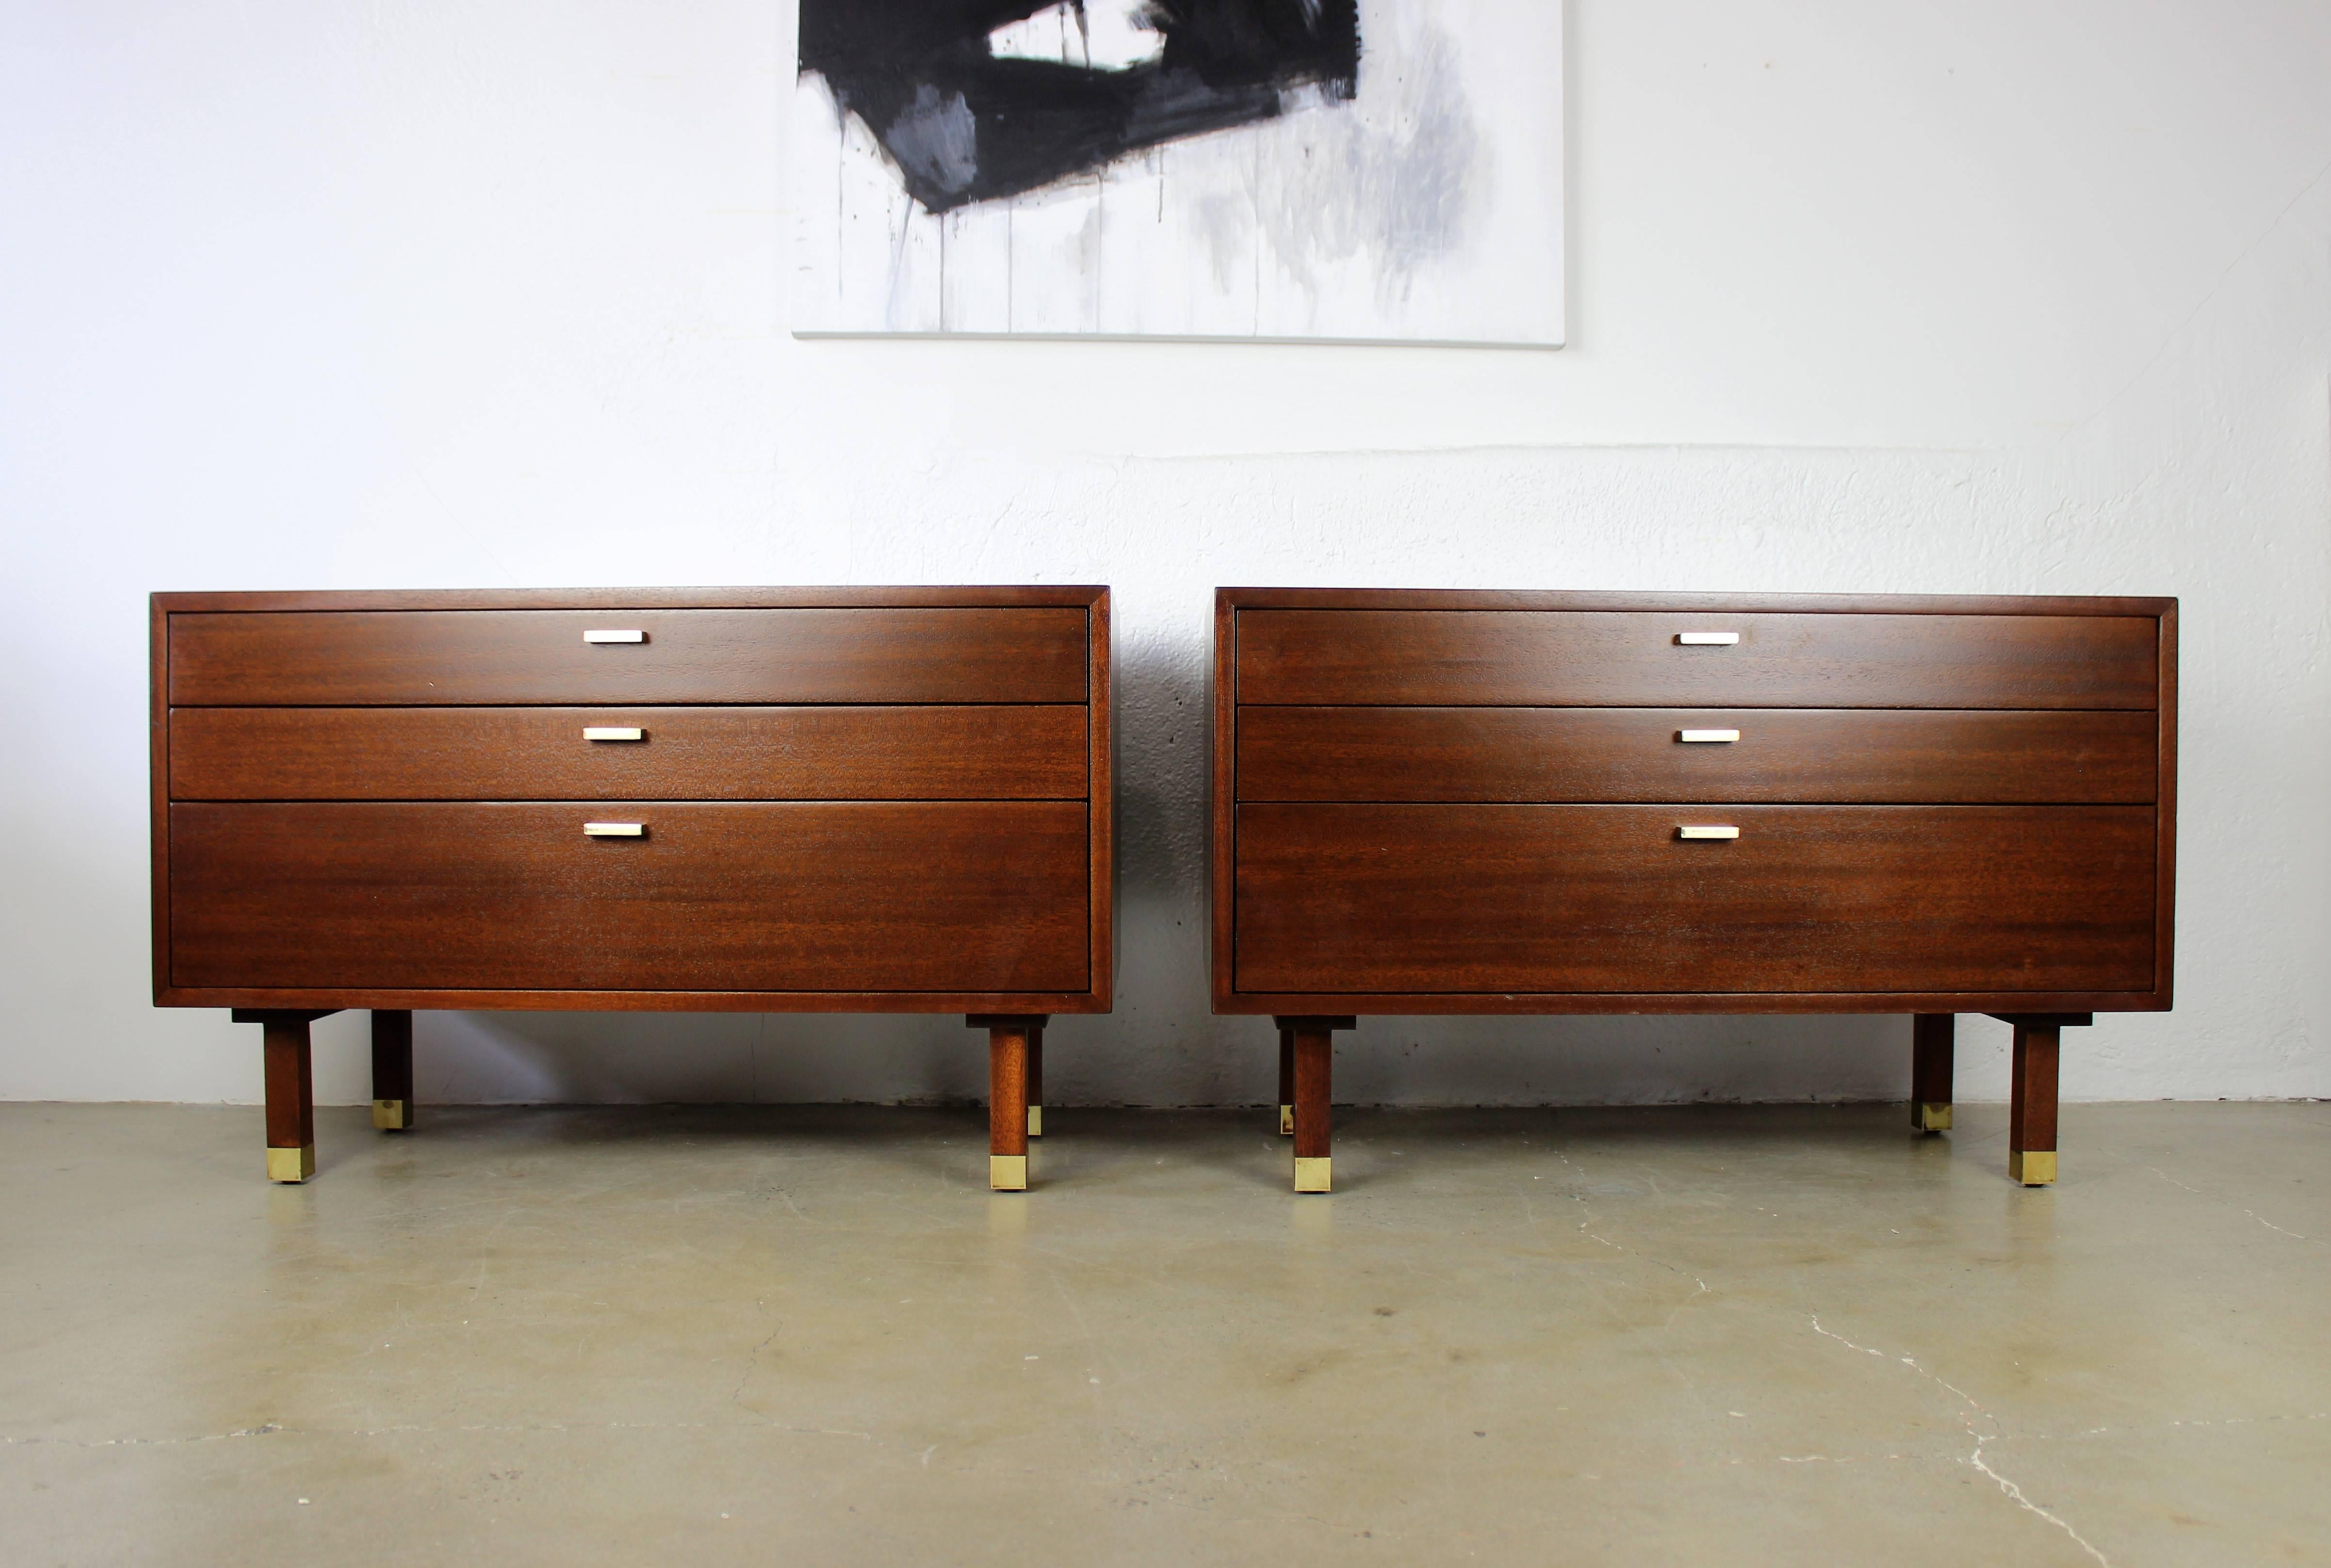 Large mahogany Harvey Probber nightstands or bedside tables with brass feet and drawer pulls, circa 1965. Beautiful grain and clean handsome lines. These cabinets have been fully restored and are in excellent condition. Exceptional craftsmanship.